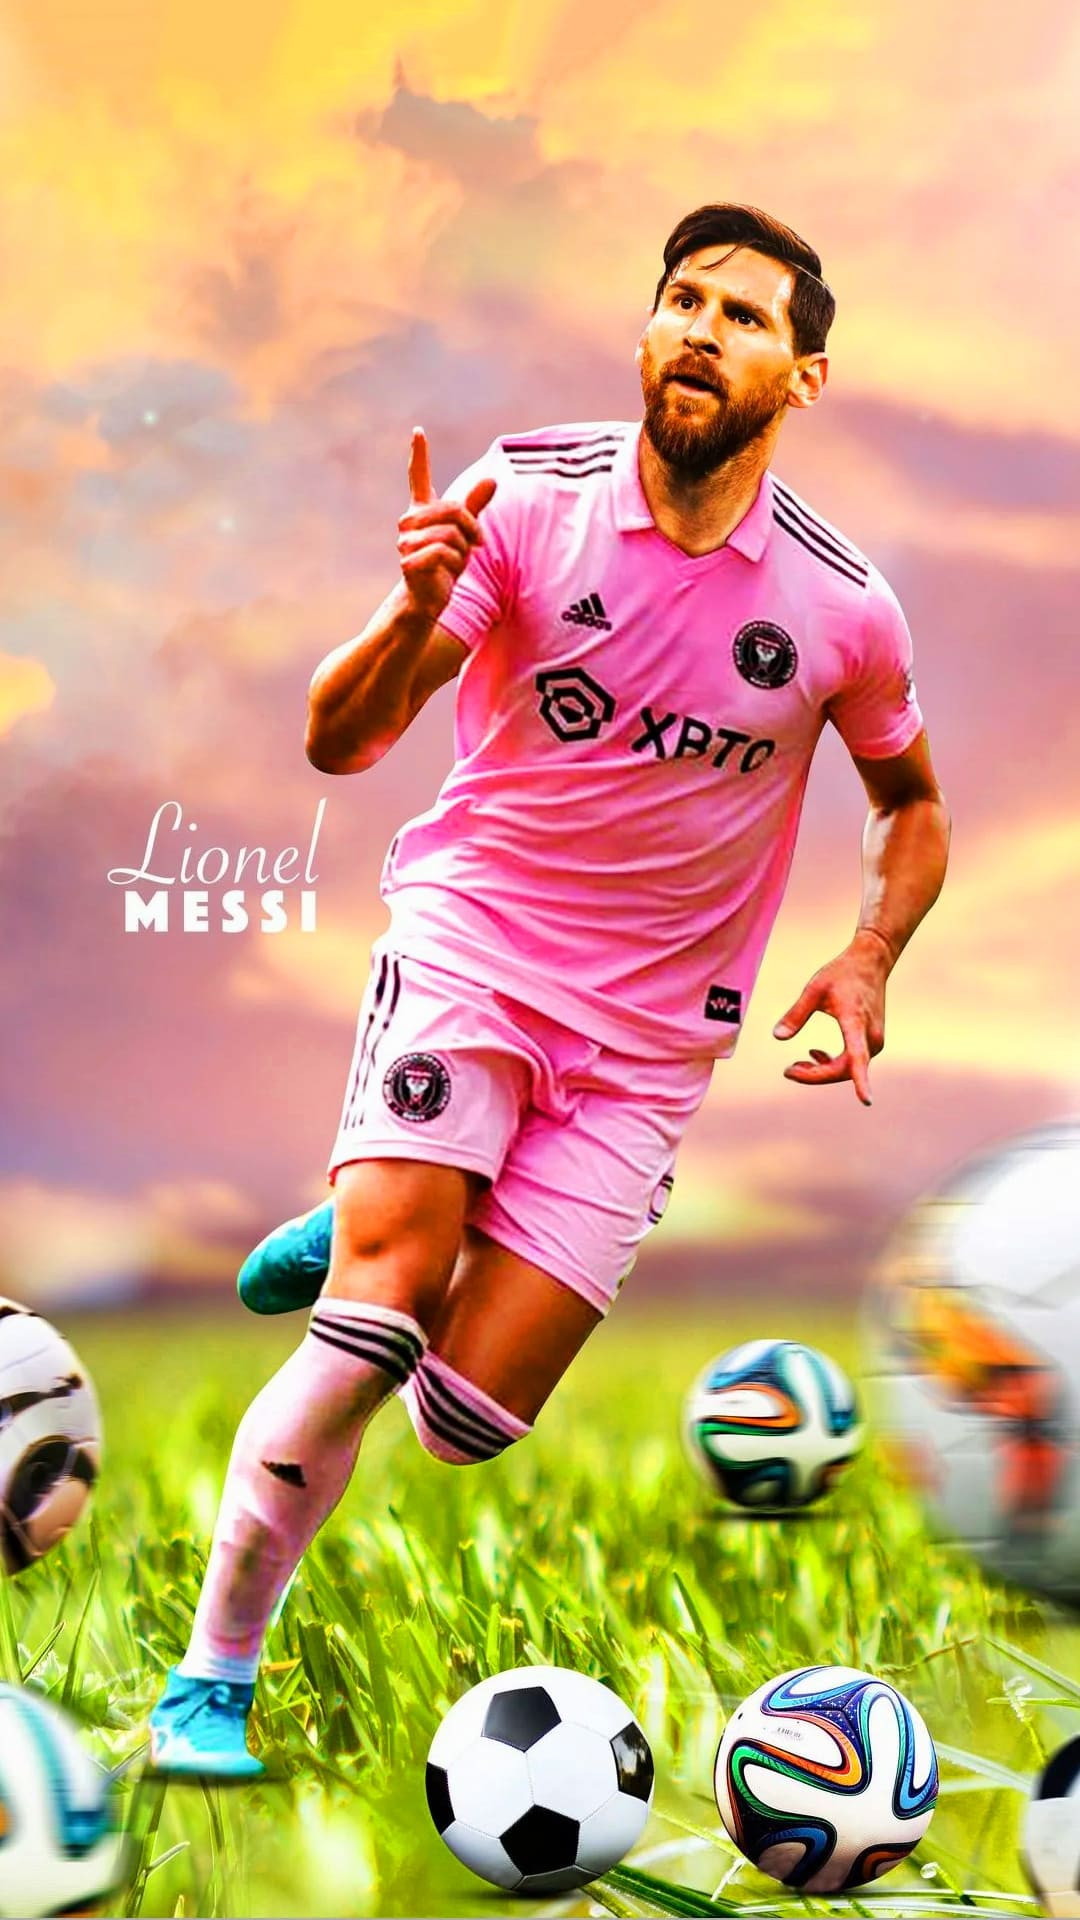 Lionel Messi Inter Miami HD Wallpapers For Android With high-resolution 1080X1920 pixel. You can use this wallpaper for your Android backgrounds, Tablet, Samsung Screensavers, Mobile Phone Lock Screen and another Smartphones device